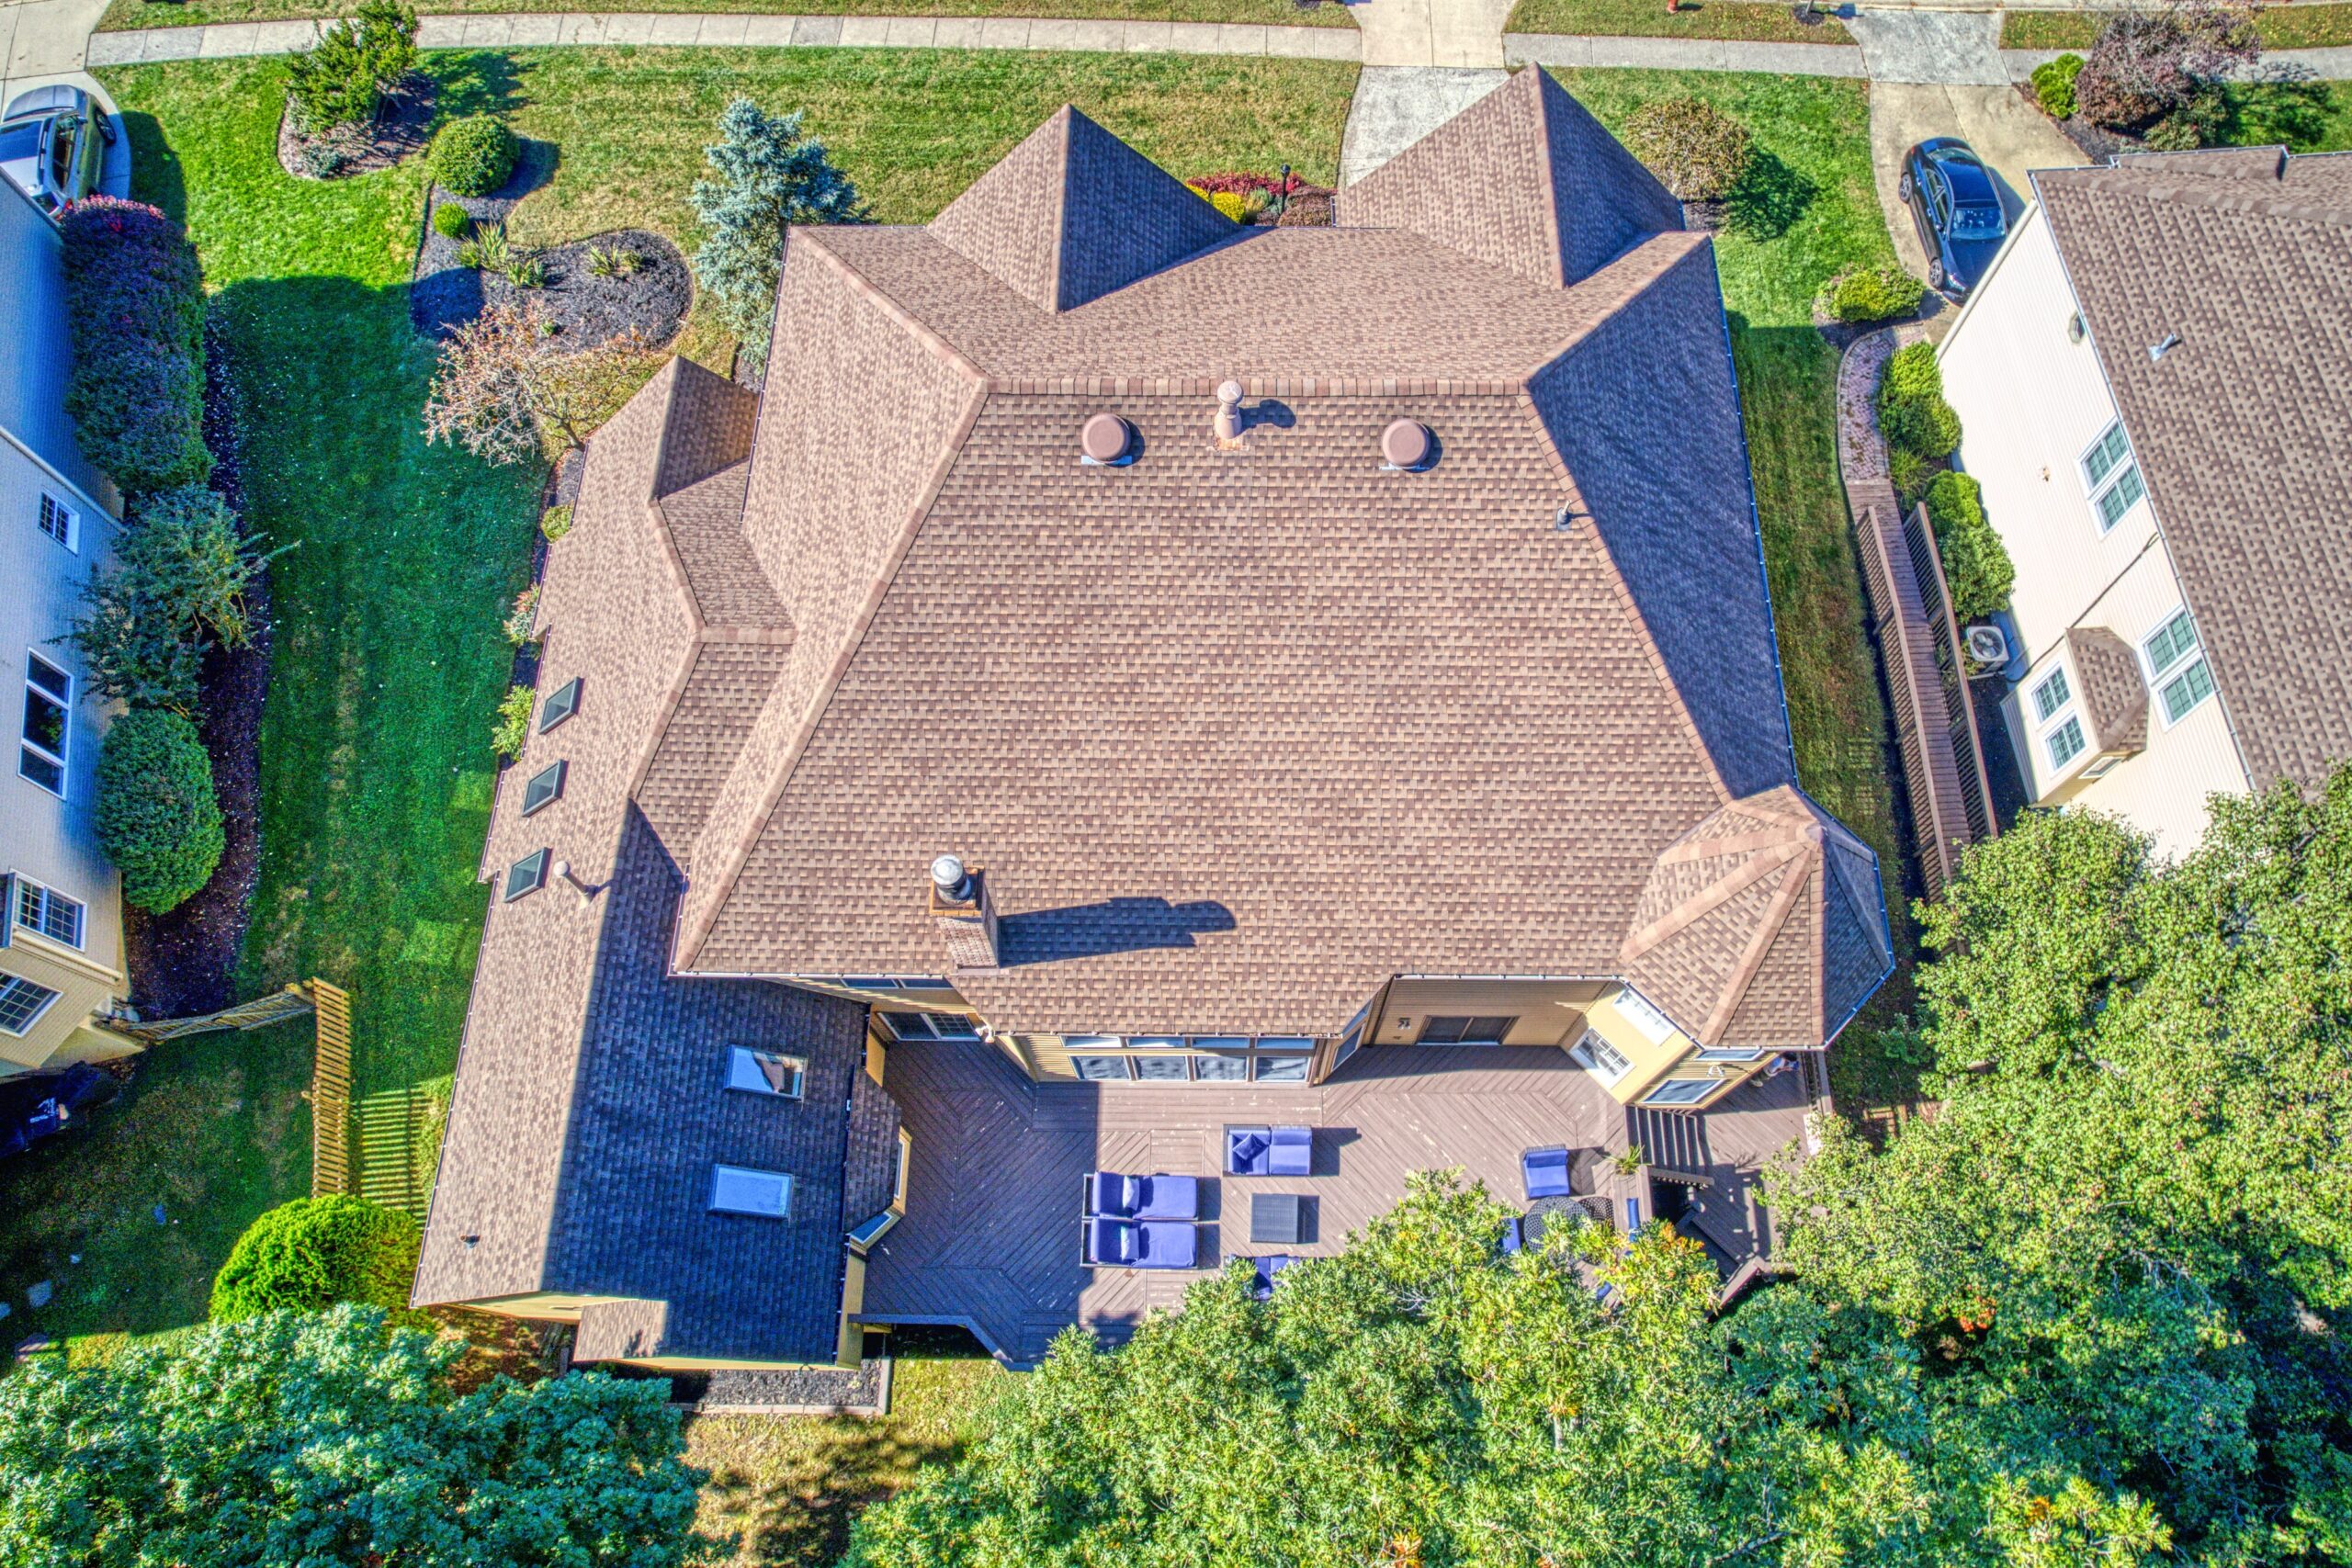 Aerial exterior photo of 21024 Starflower Way in Ashburn, VA - showing the entire home from directly above, looking down at the deck with a variety of deck furniture